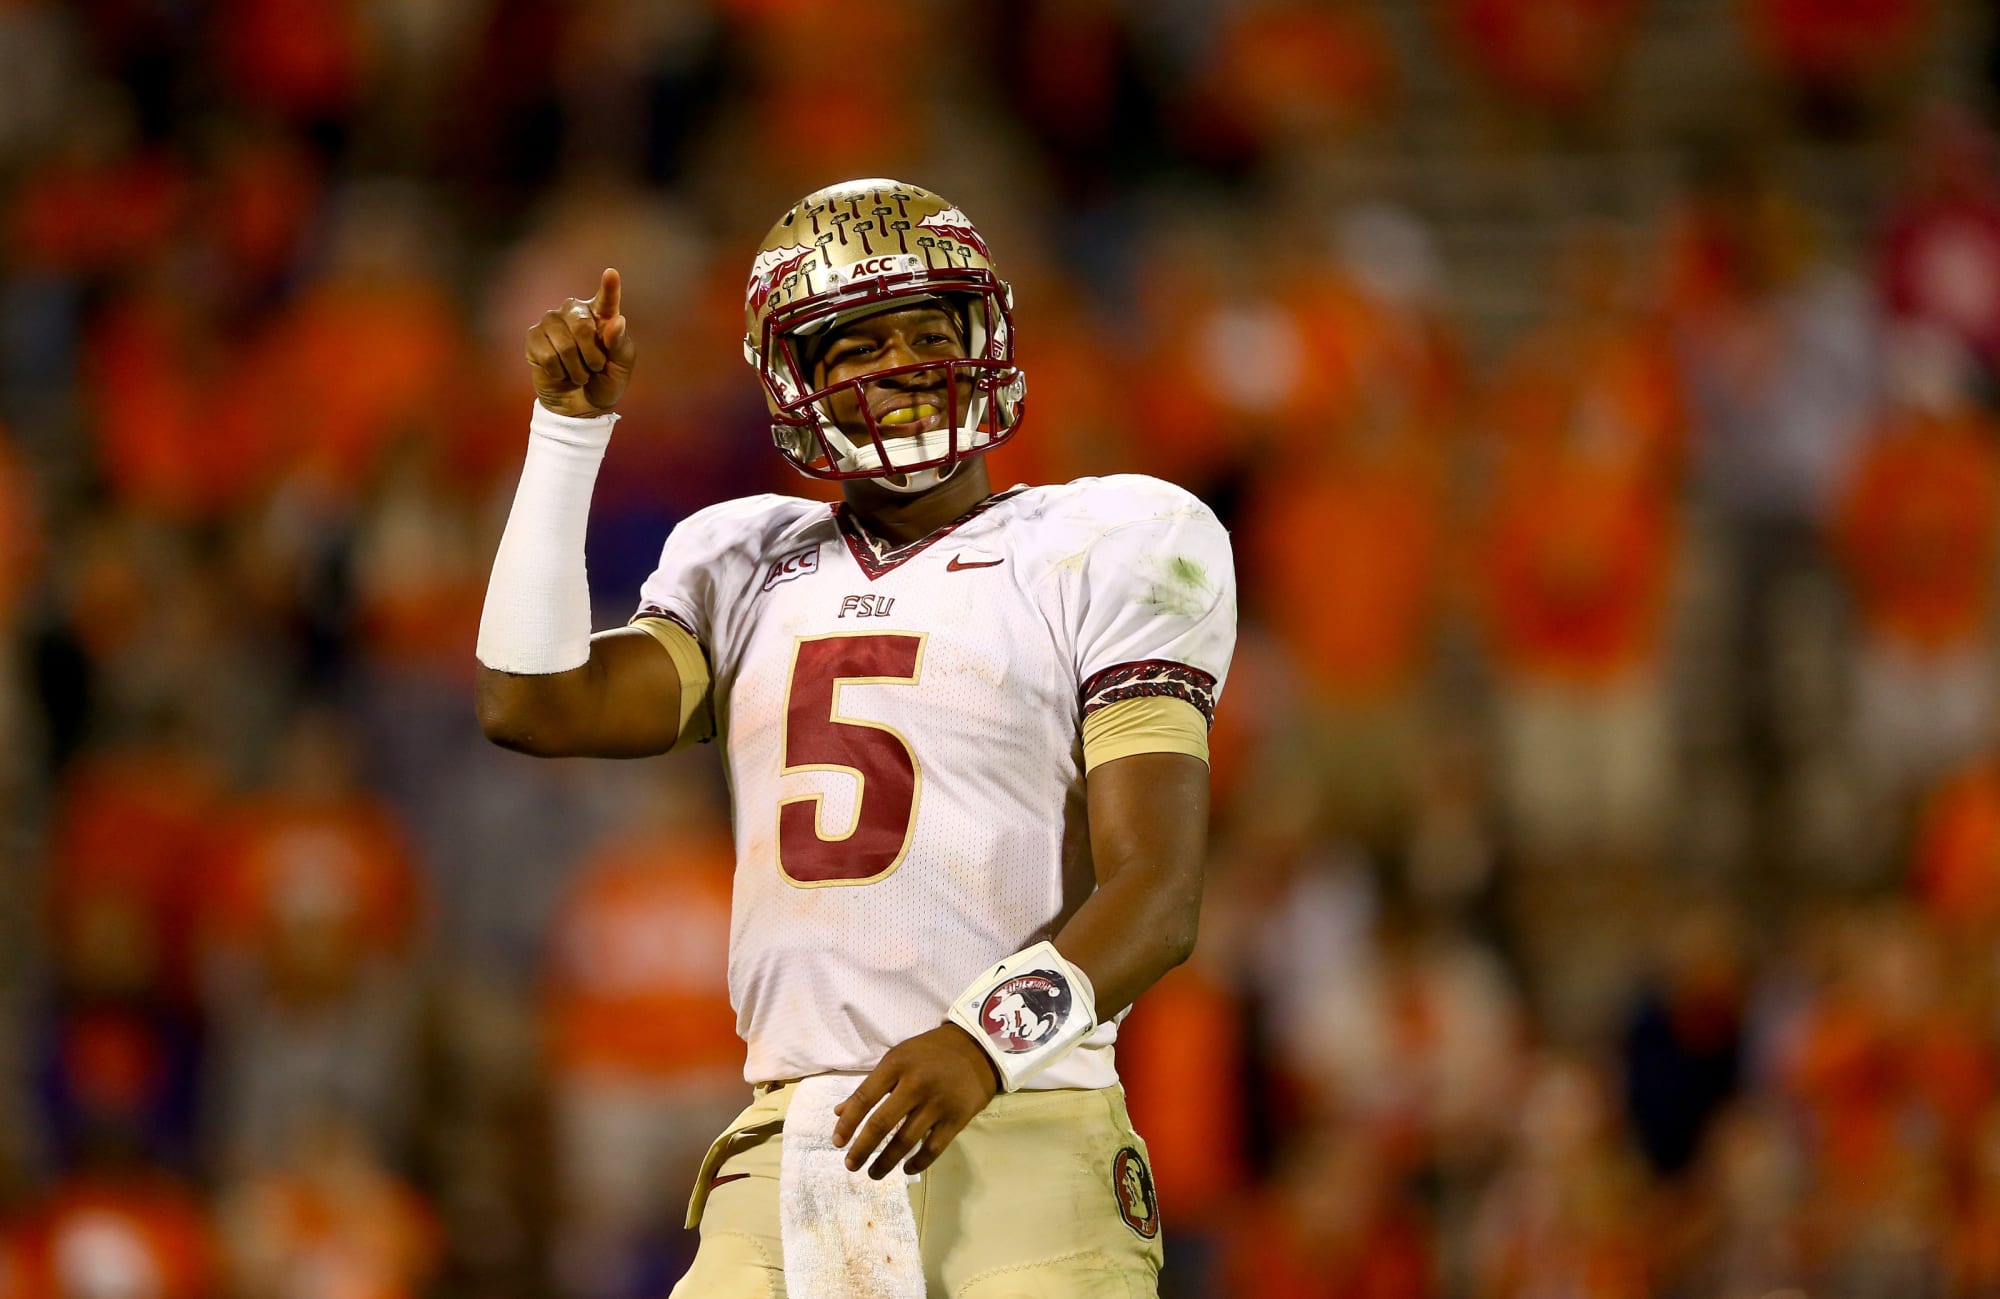 FSU Football Top Seminoles that should have jersey numbers honored